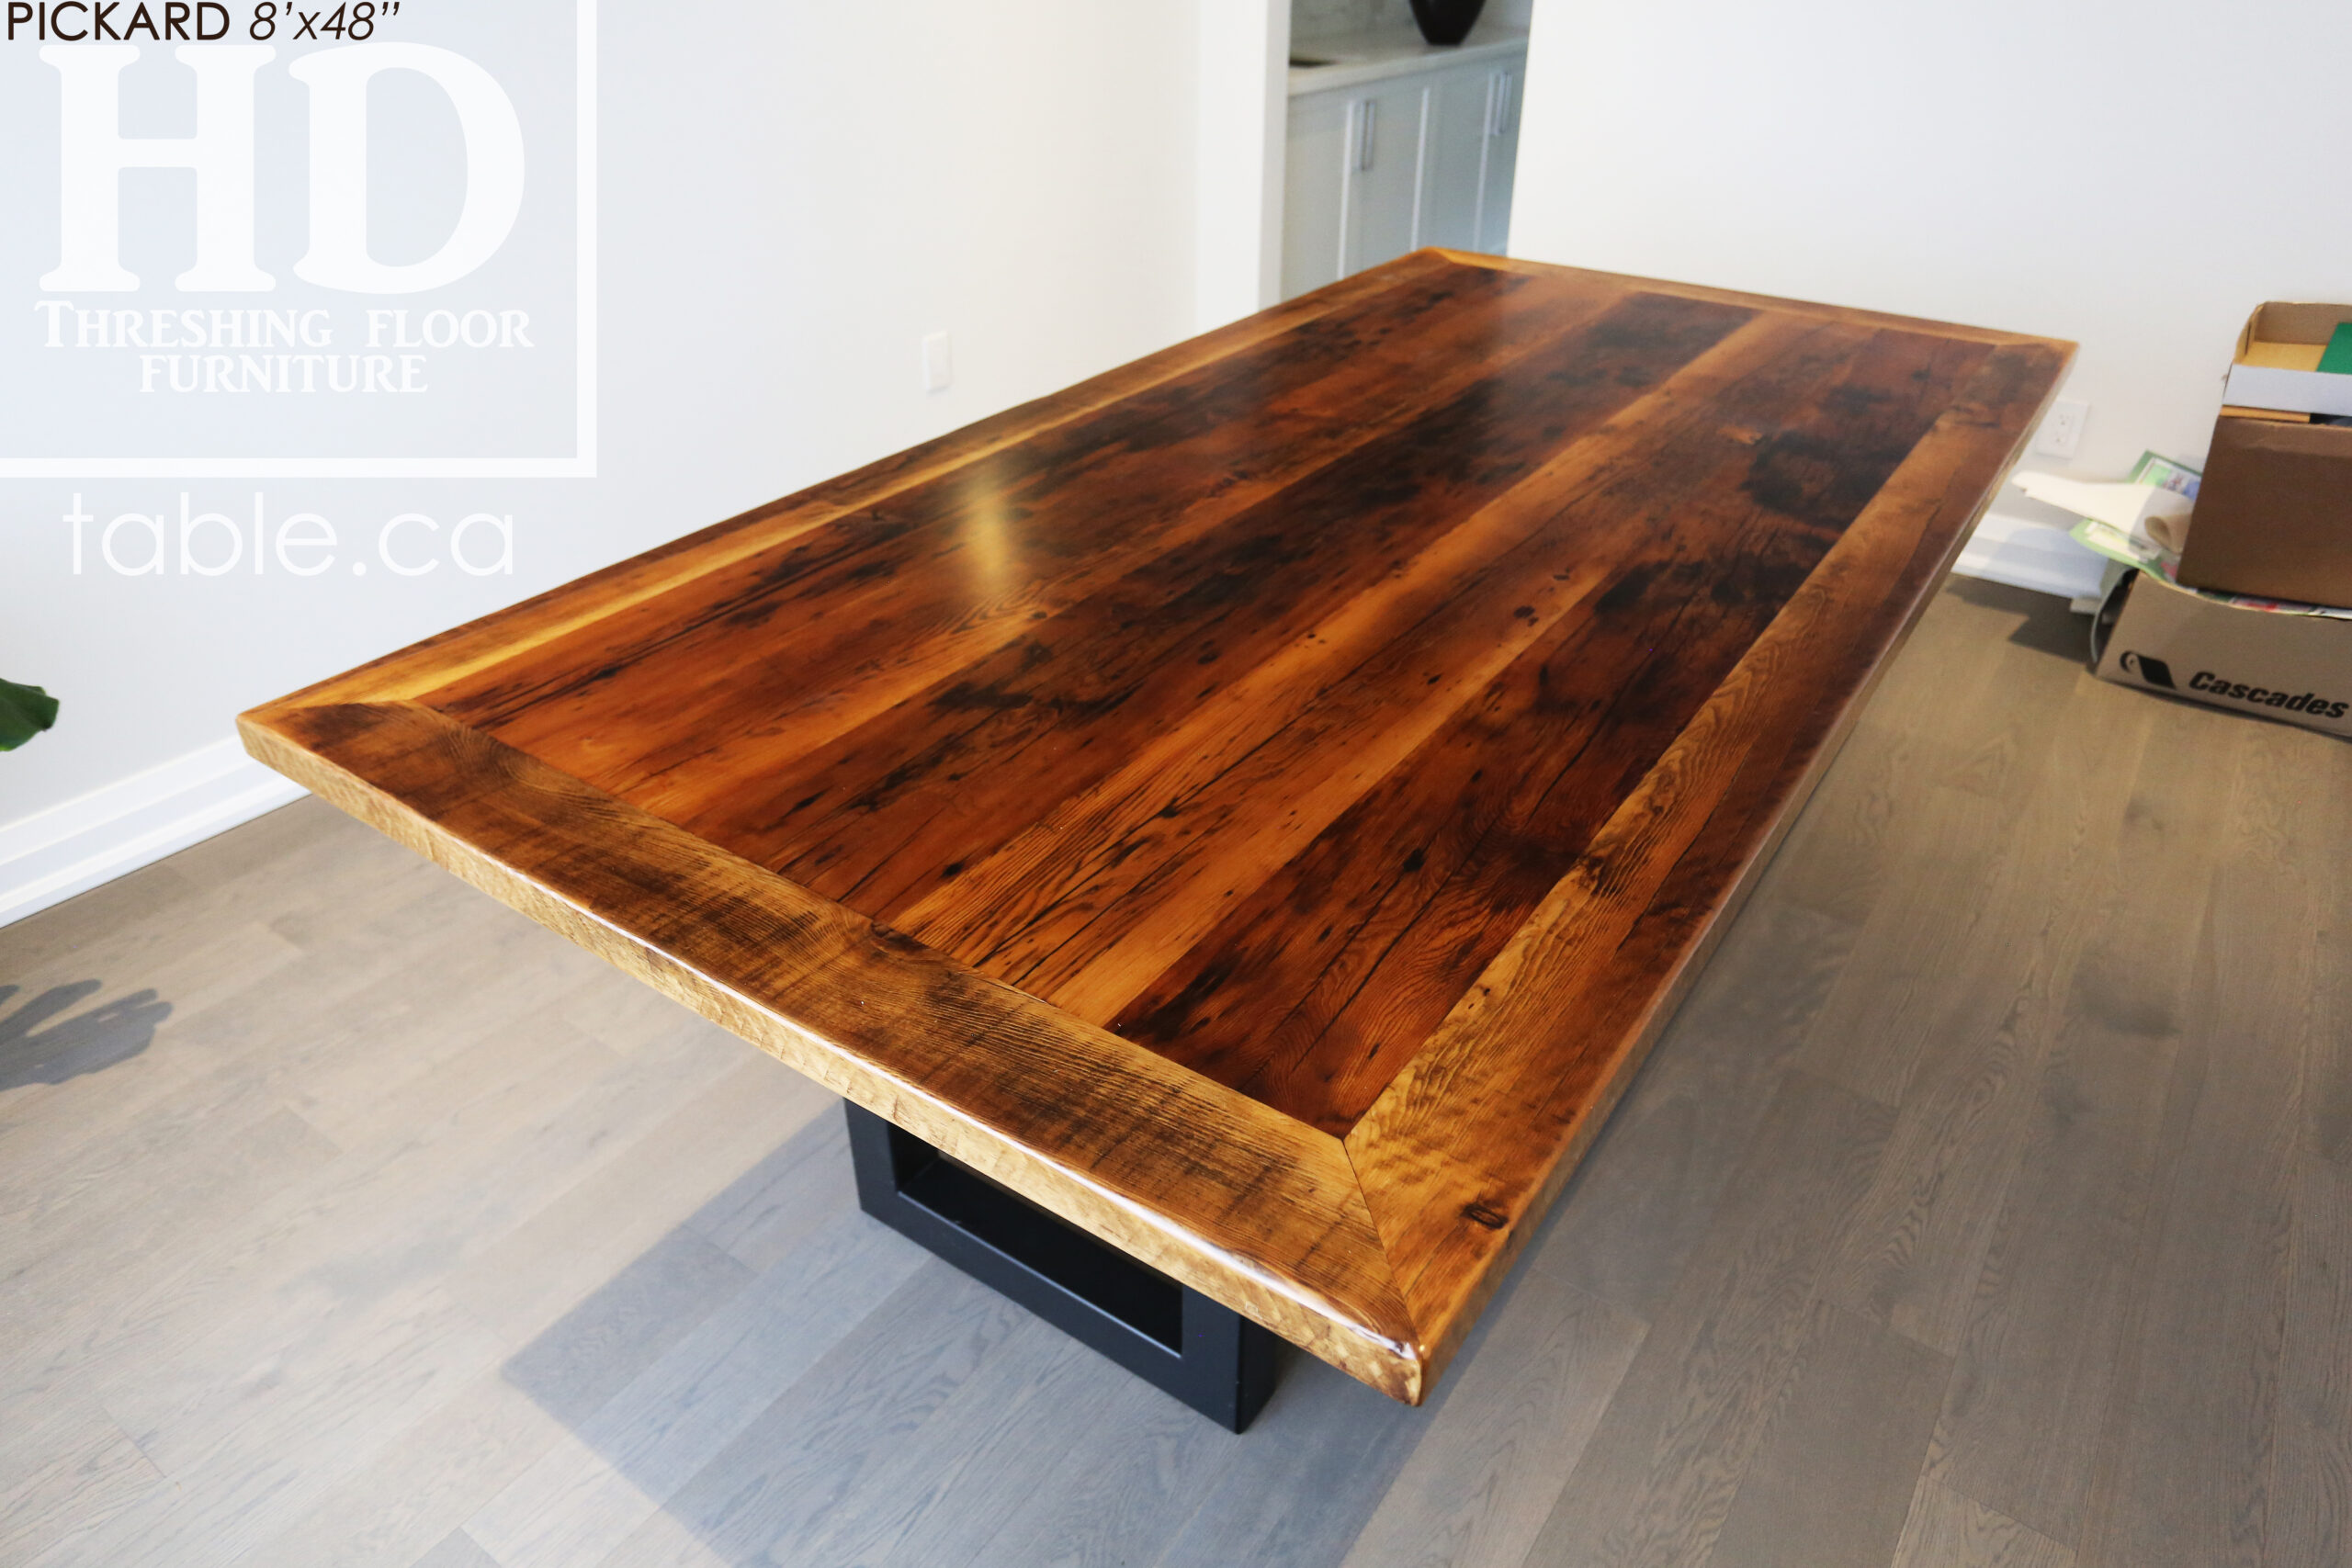 8’ Reclaimed Ontario Barnwood Table we made for an Toronto, Ontario home – 48” wide – Matte Black Steel Base – Mitered Corners Option - Old Growth Hemlock Threshing Floor Construction - Original edges & distressing maintained – Bread Edge Ends - Premium epoxy + satin polyurethane finish – www.table.ca